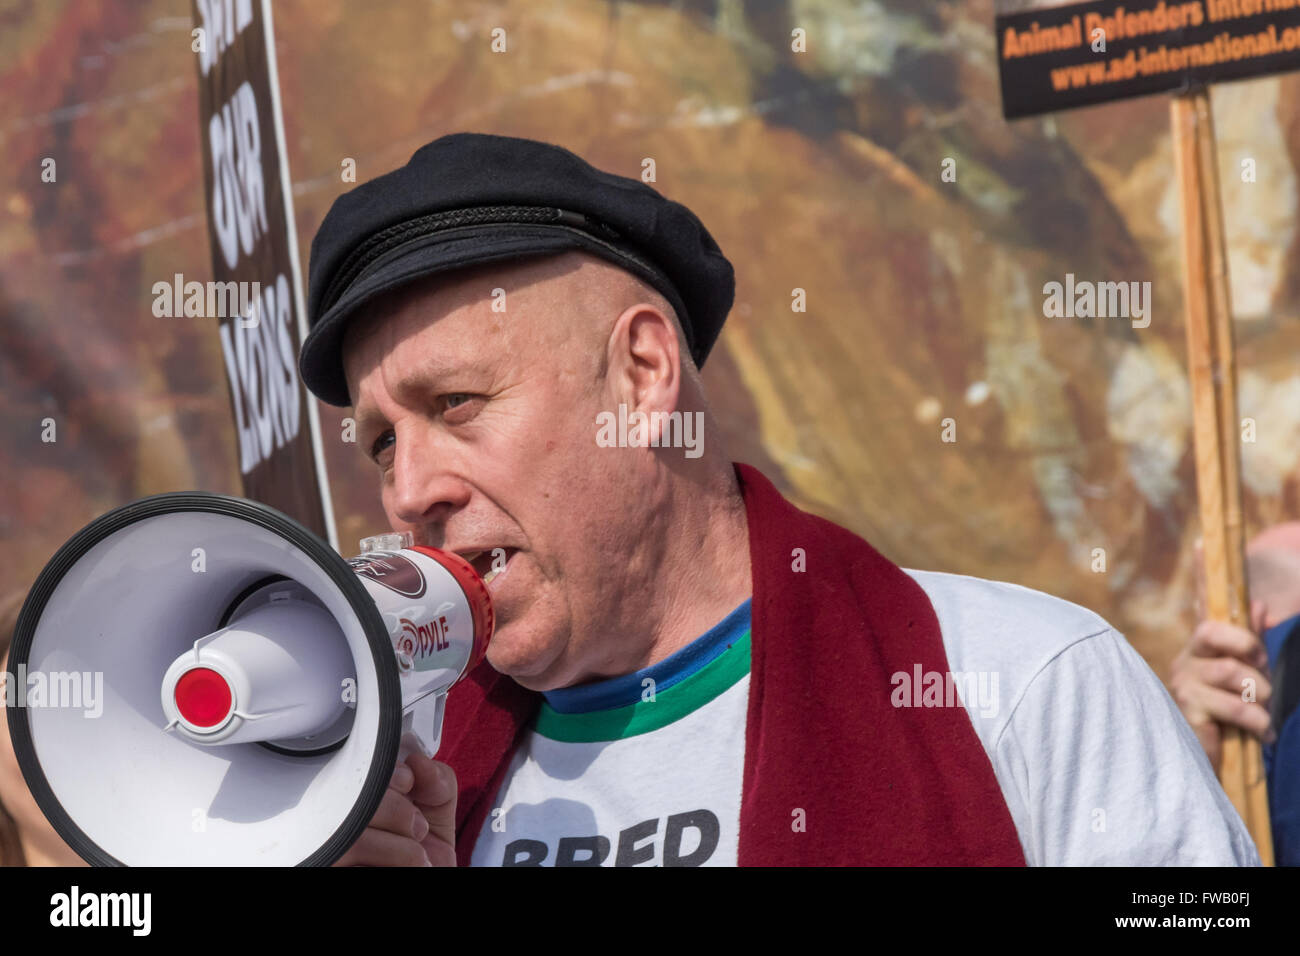 London, UK. 2nd April, 2016. Protesters in London at a rally in Trafalgar Square as a part of the Global March for Lions, calling for an end to the breeding of lions for petting zoos and the hunting of captive lions bred for slaughter on farms in Southern Africa by tourist trophy hunters. Peter Marshall/Alamy Live News Stock Photo